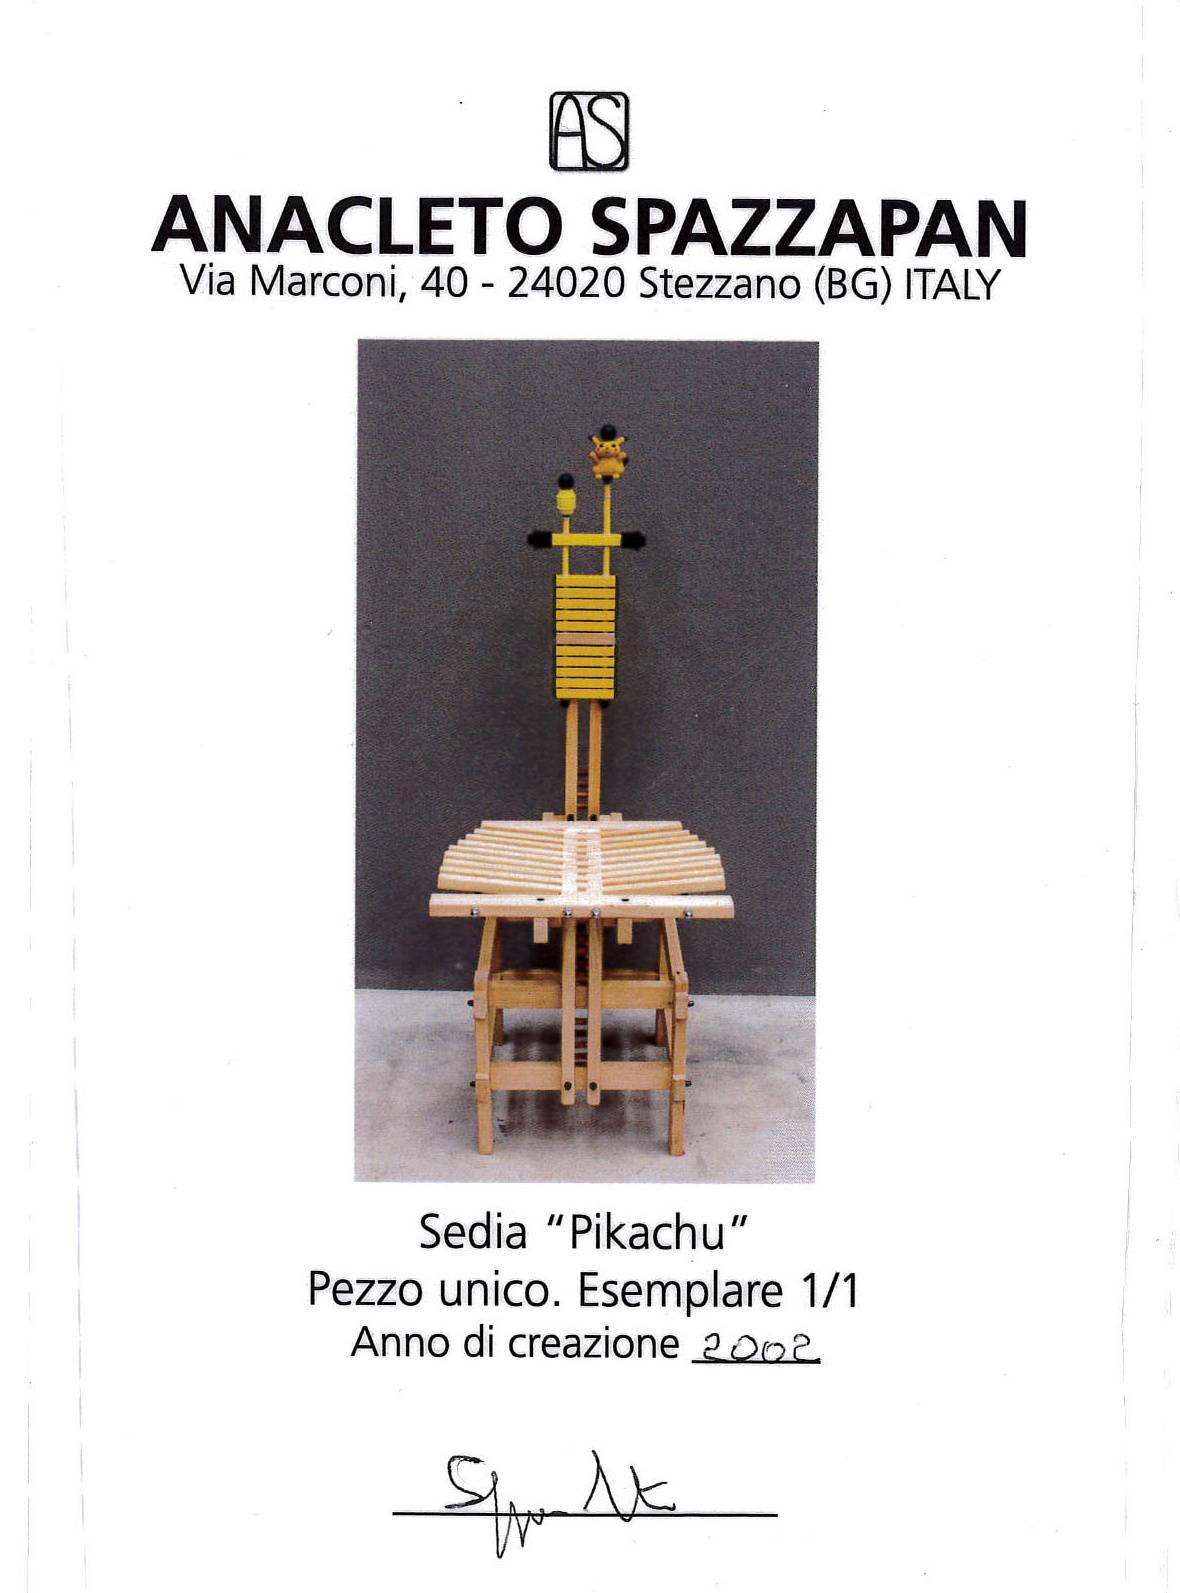 Pikachu chair by Anacleto Spazzapan, Italy 
age 2002 
Wooden chair 